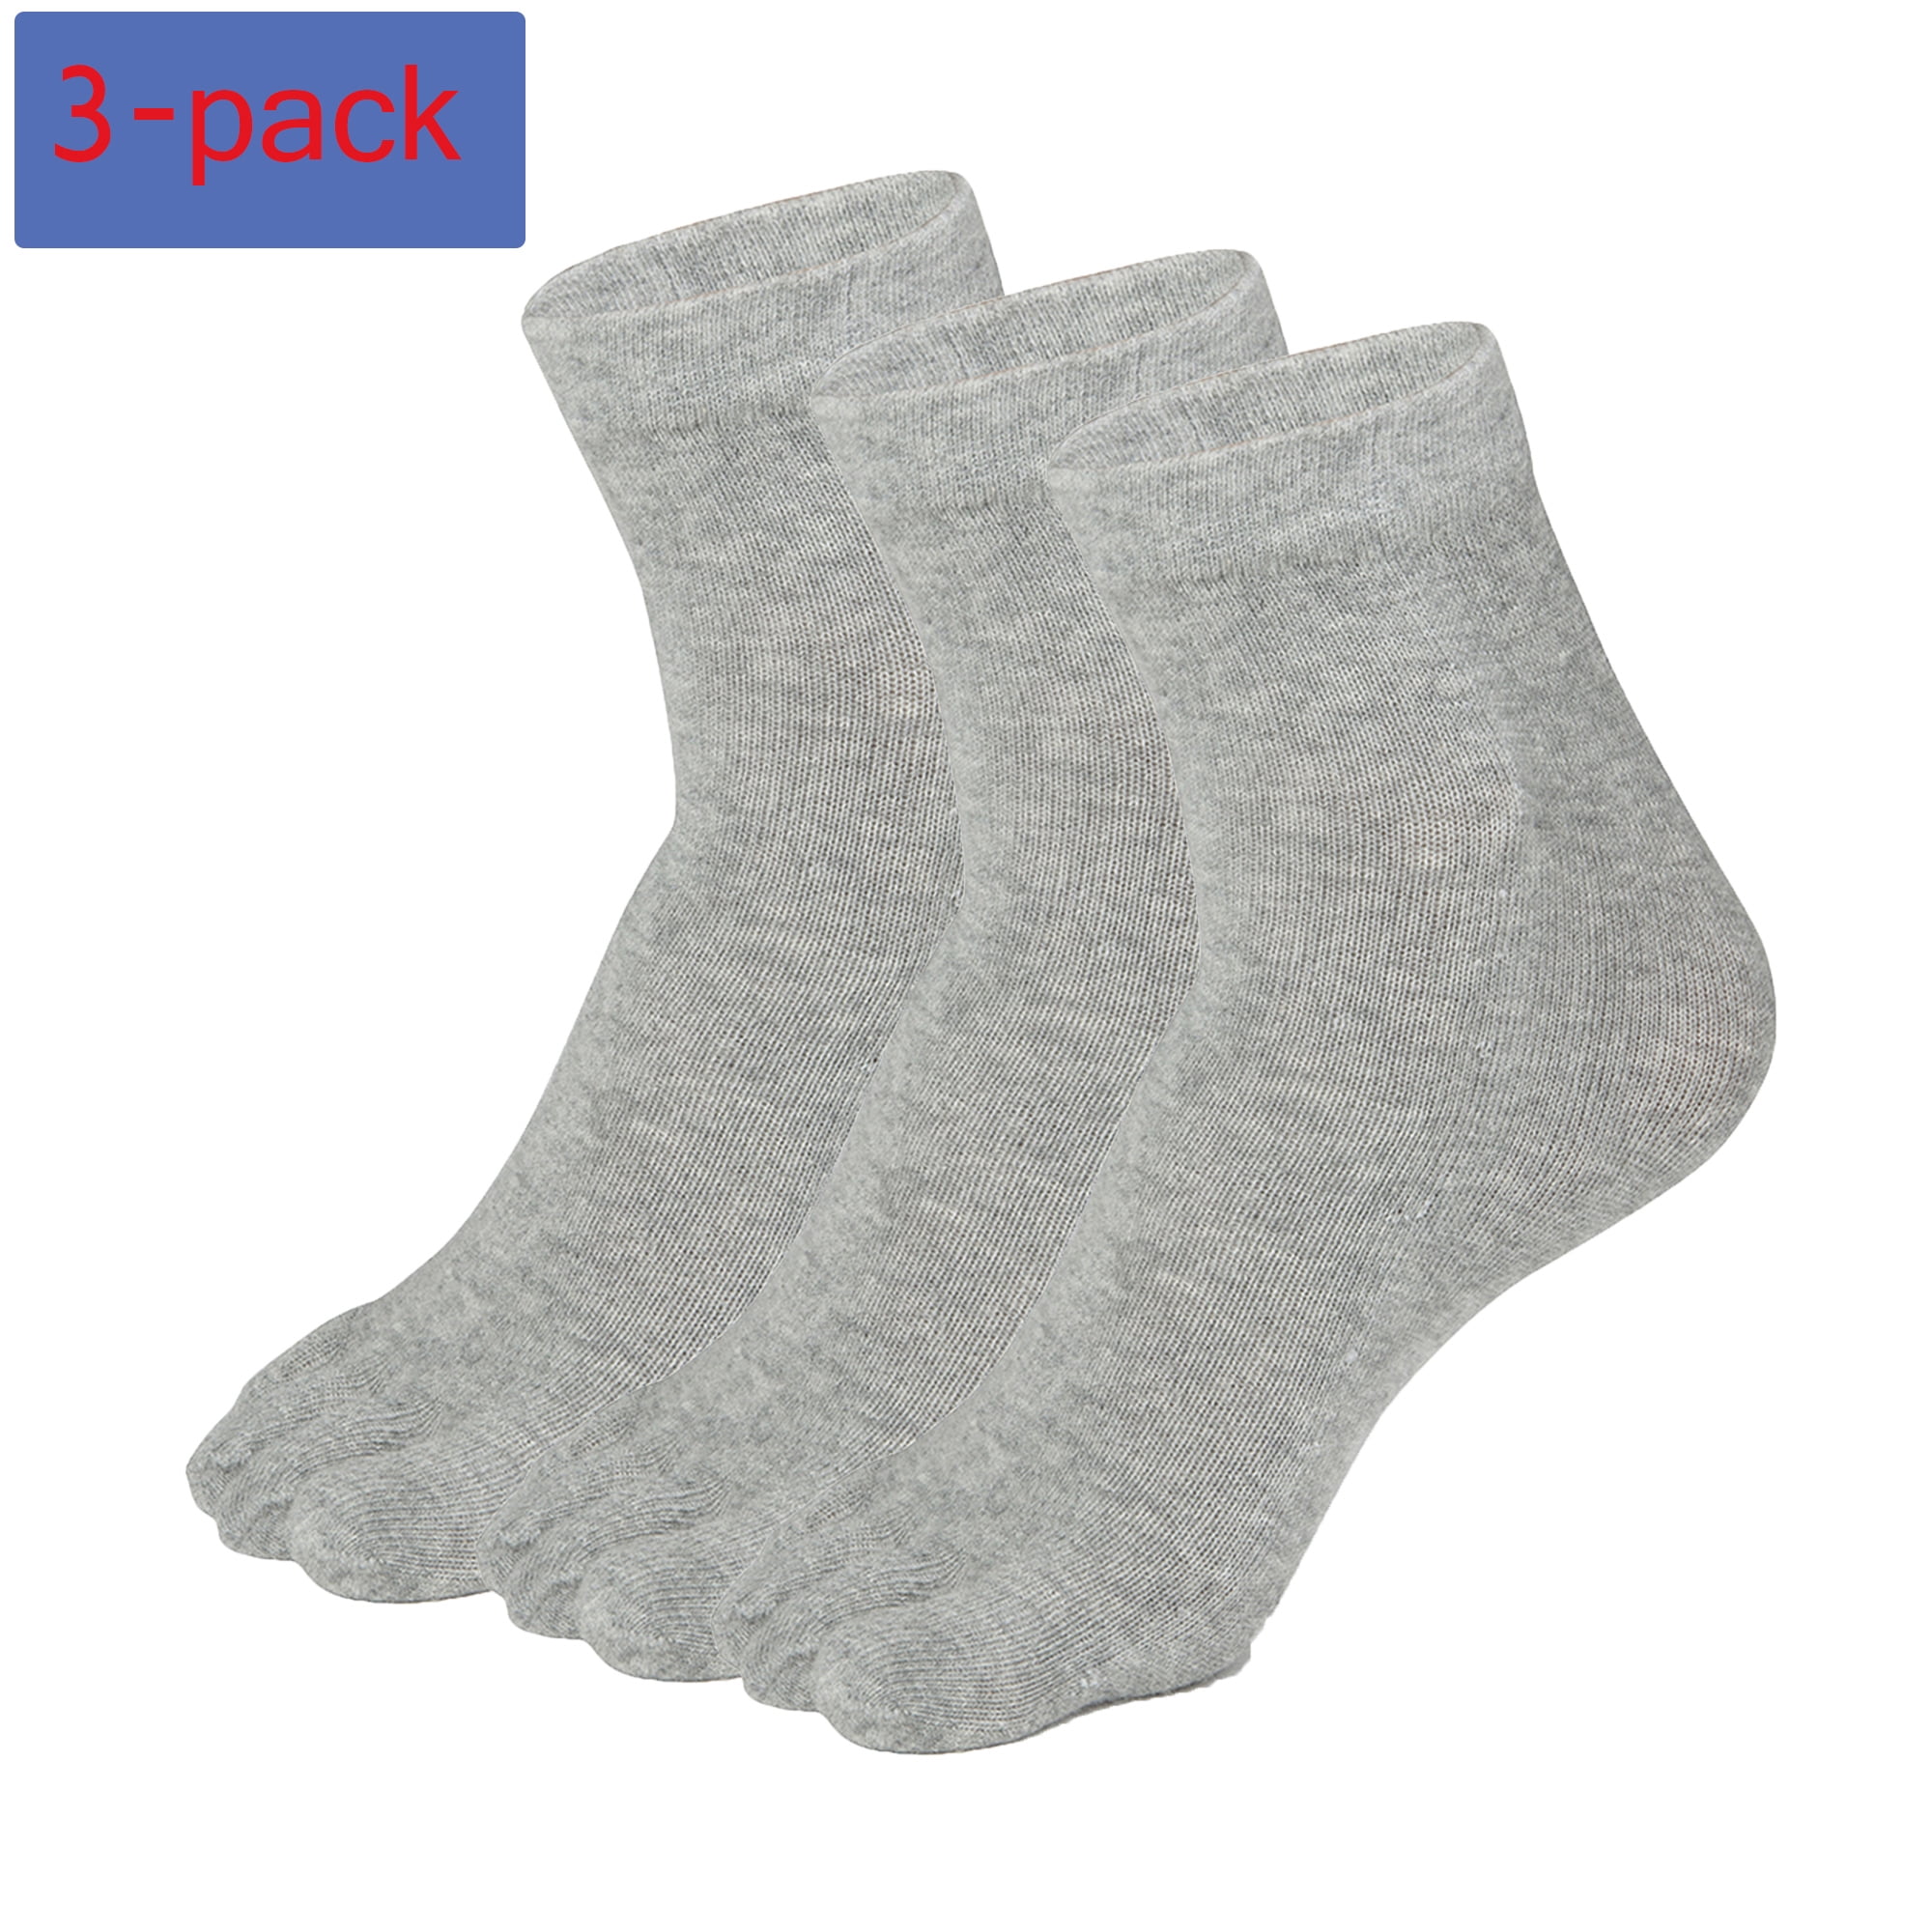 Boys/Mens Ankle Socks in Size 7-9 for Casual Wear 3 Pairs Assorted by Teknowear 